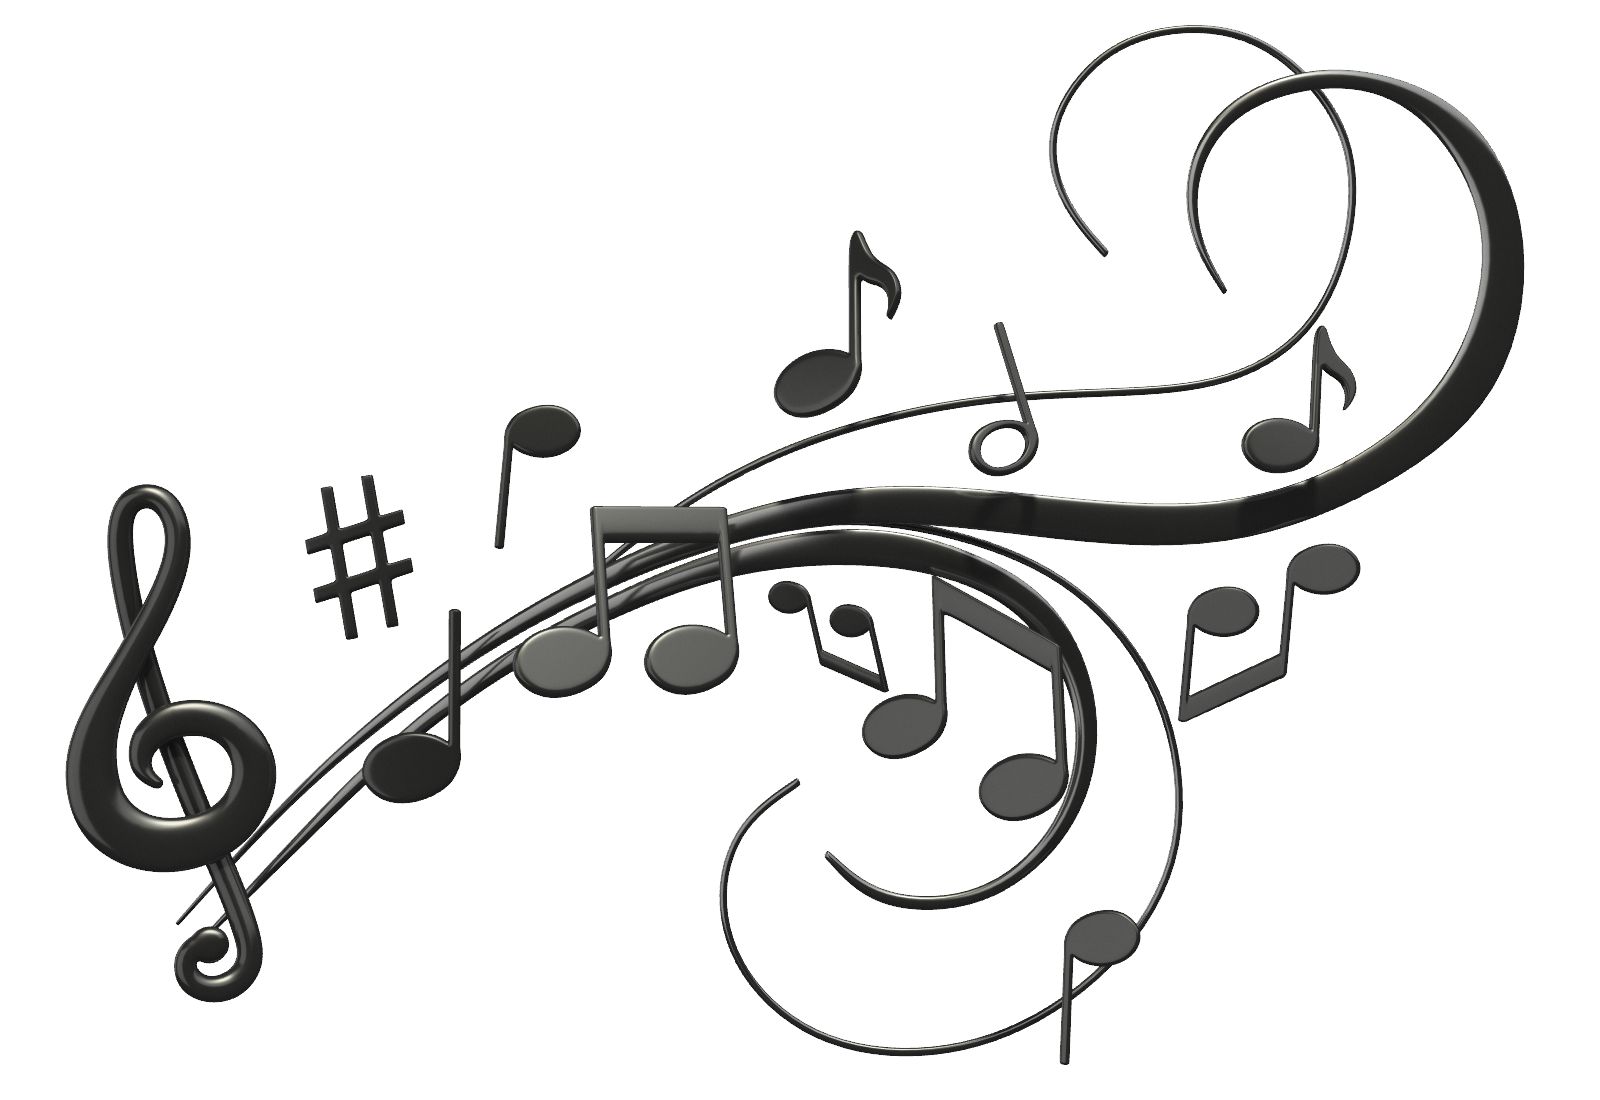 Music background clipart.